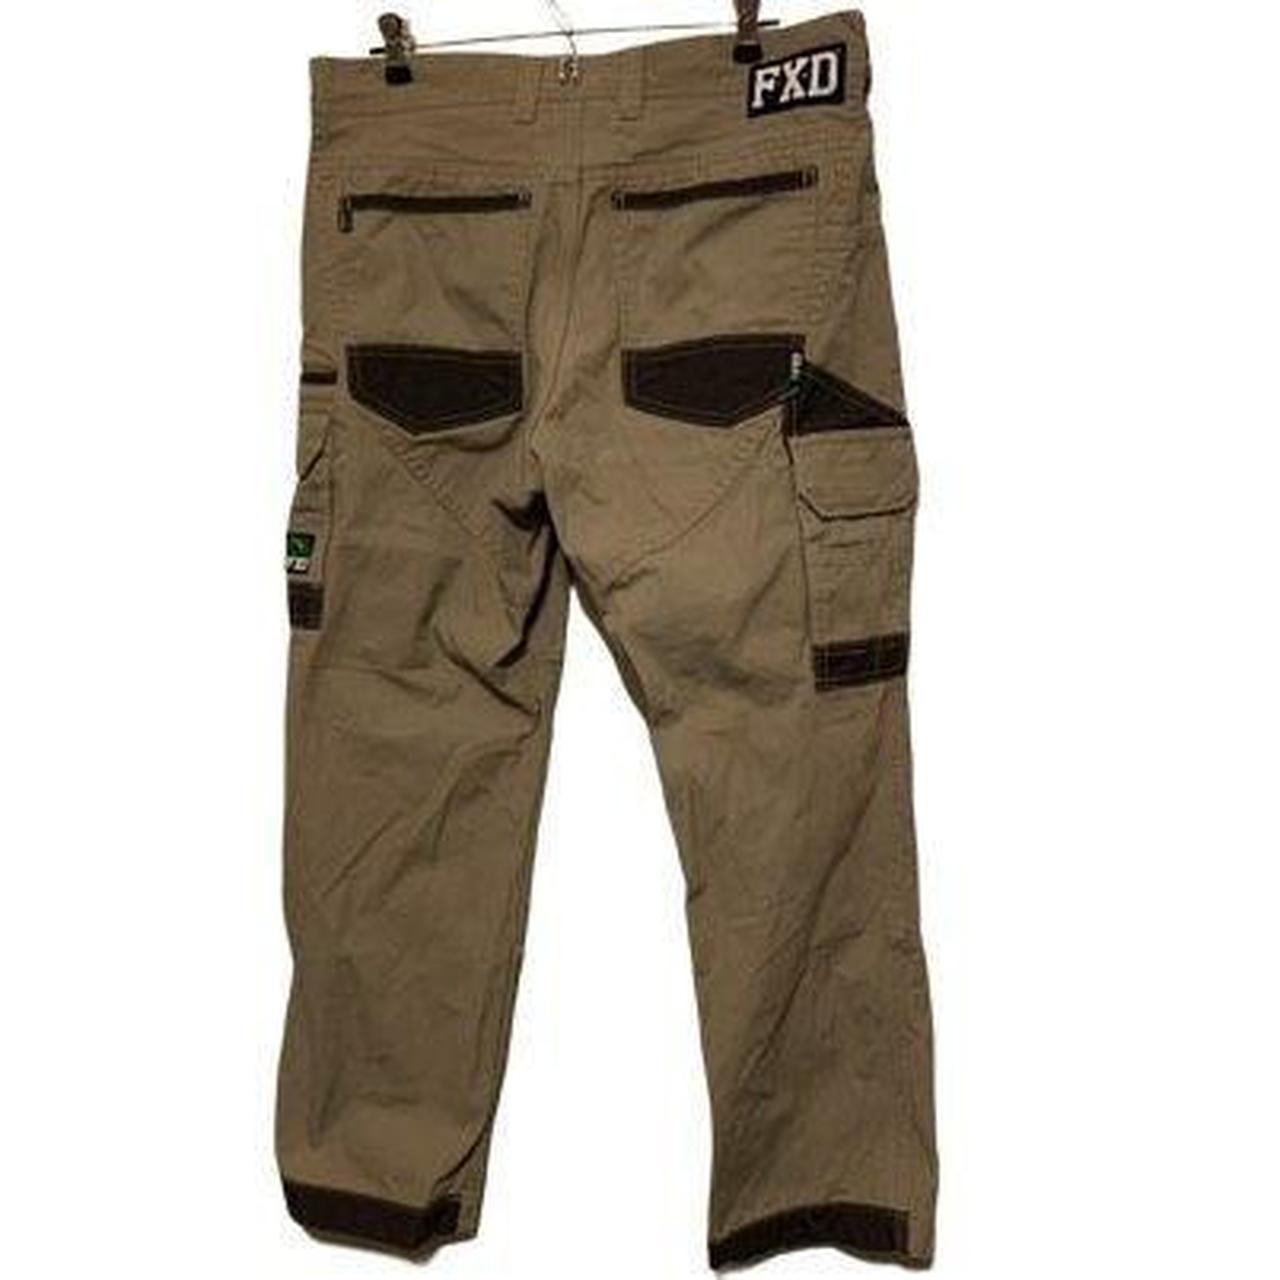 Men's Tactical BDU Pants, Cargo Style Trousers, 100% Cotton Ripstop, Made  in USA | eBay